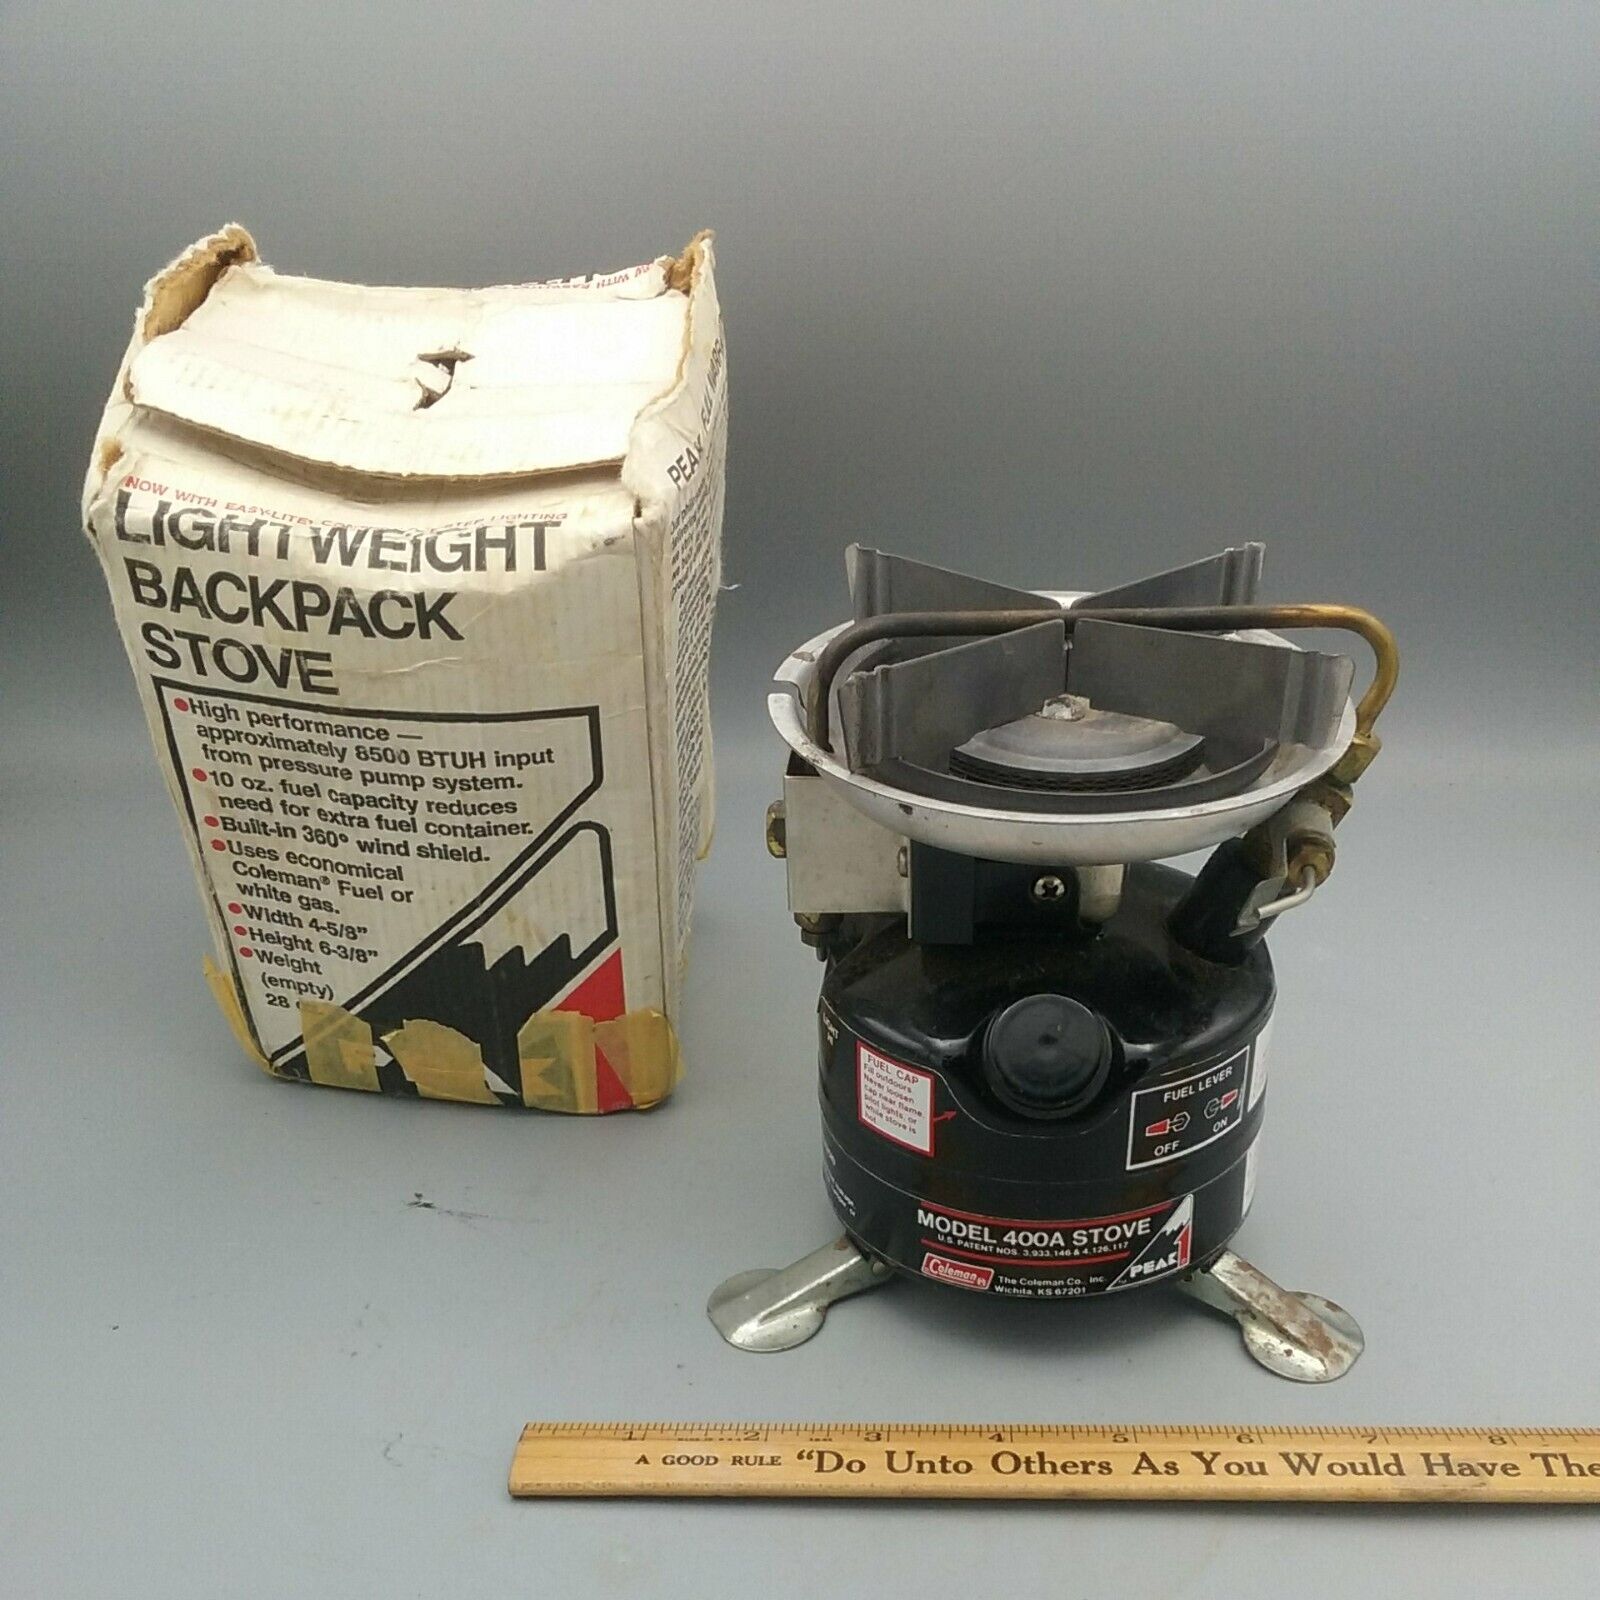 Vintage COLEMAN 400A PEAK 1 LIGHT WEIGHT STOVE HIKING CAMPING w/ Box  1985